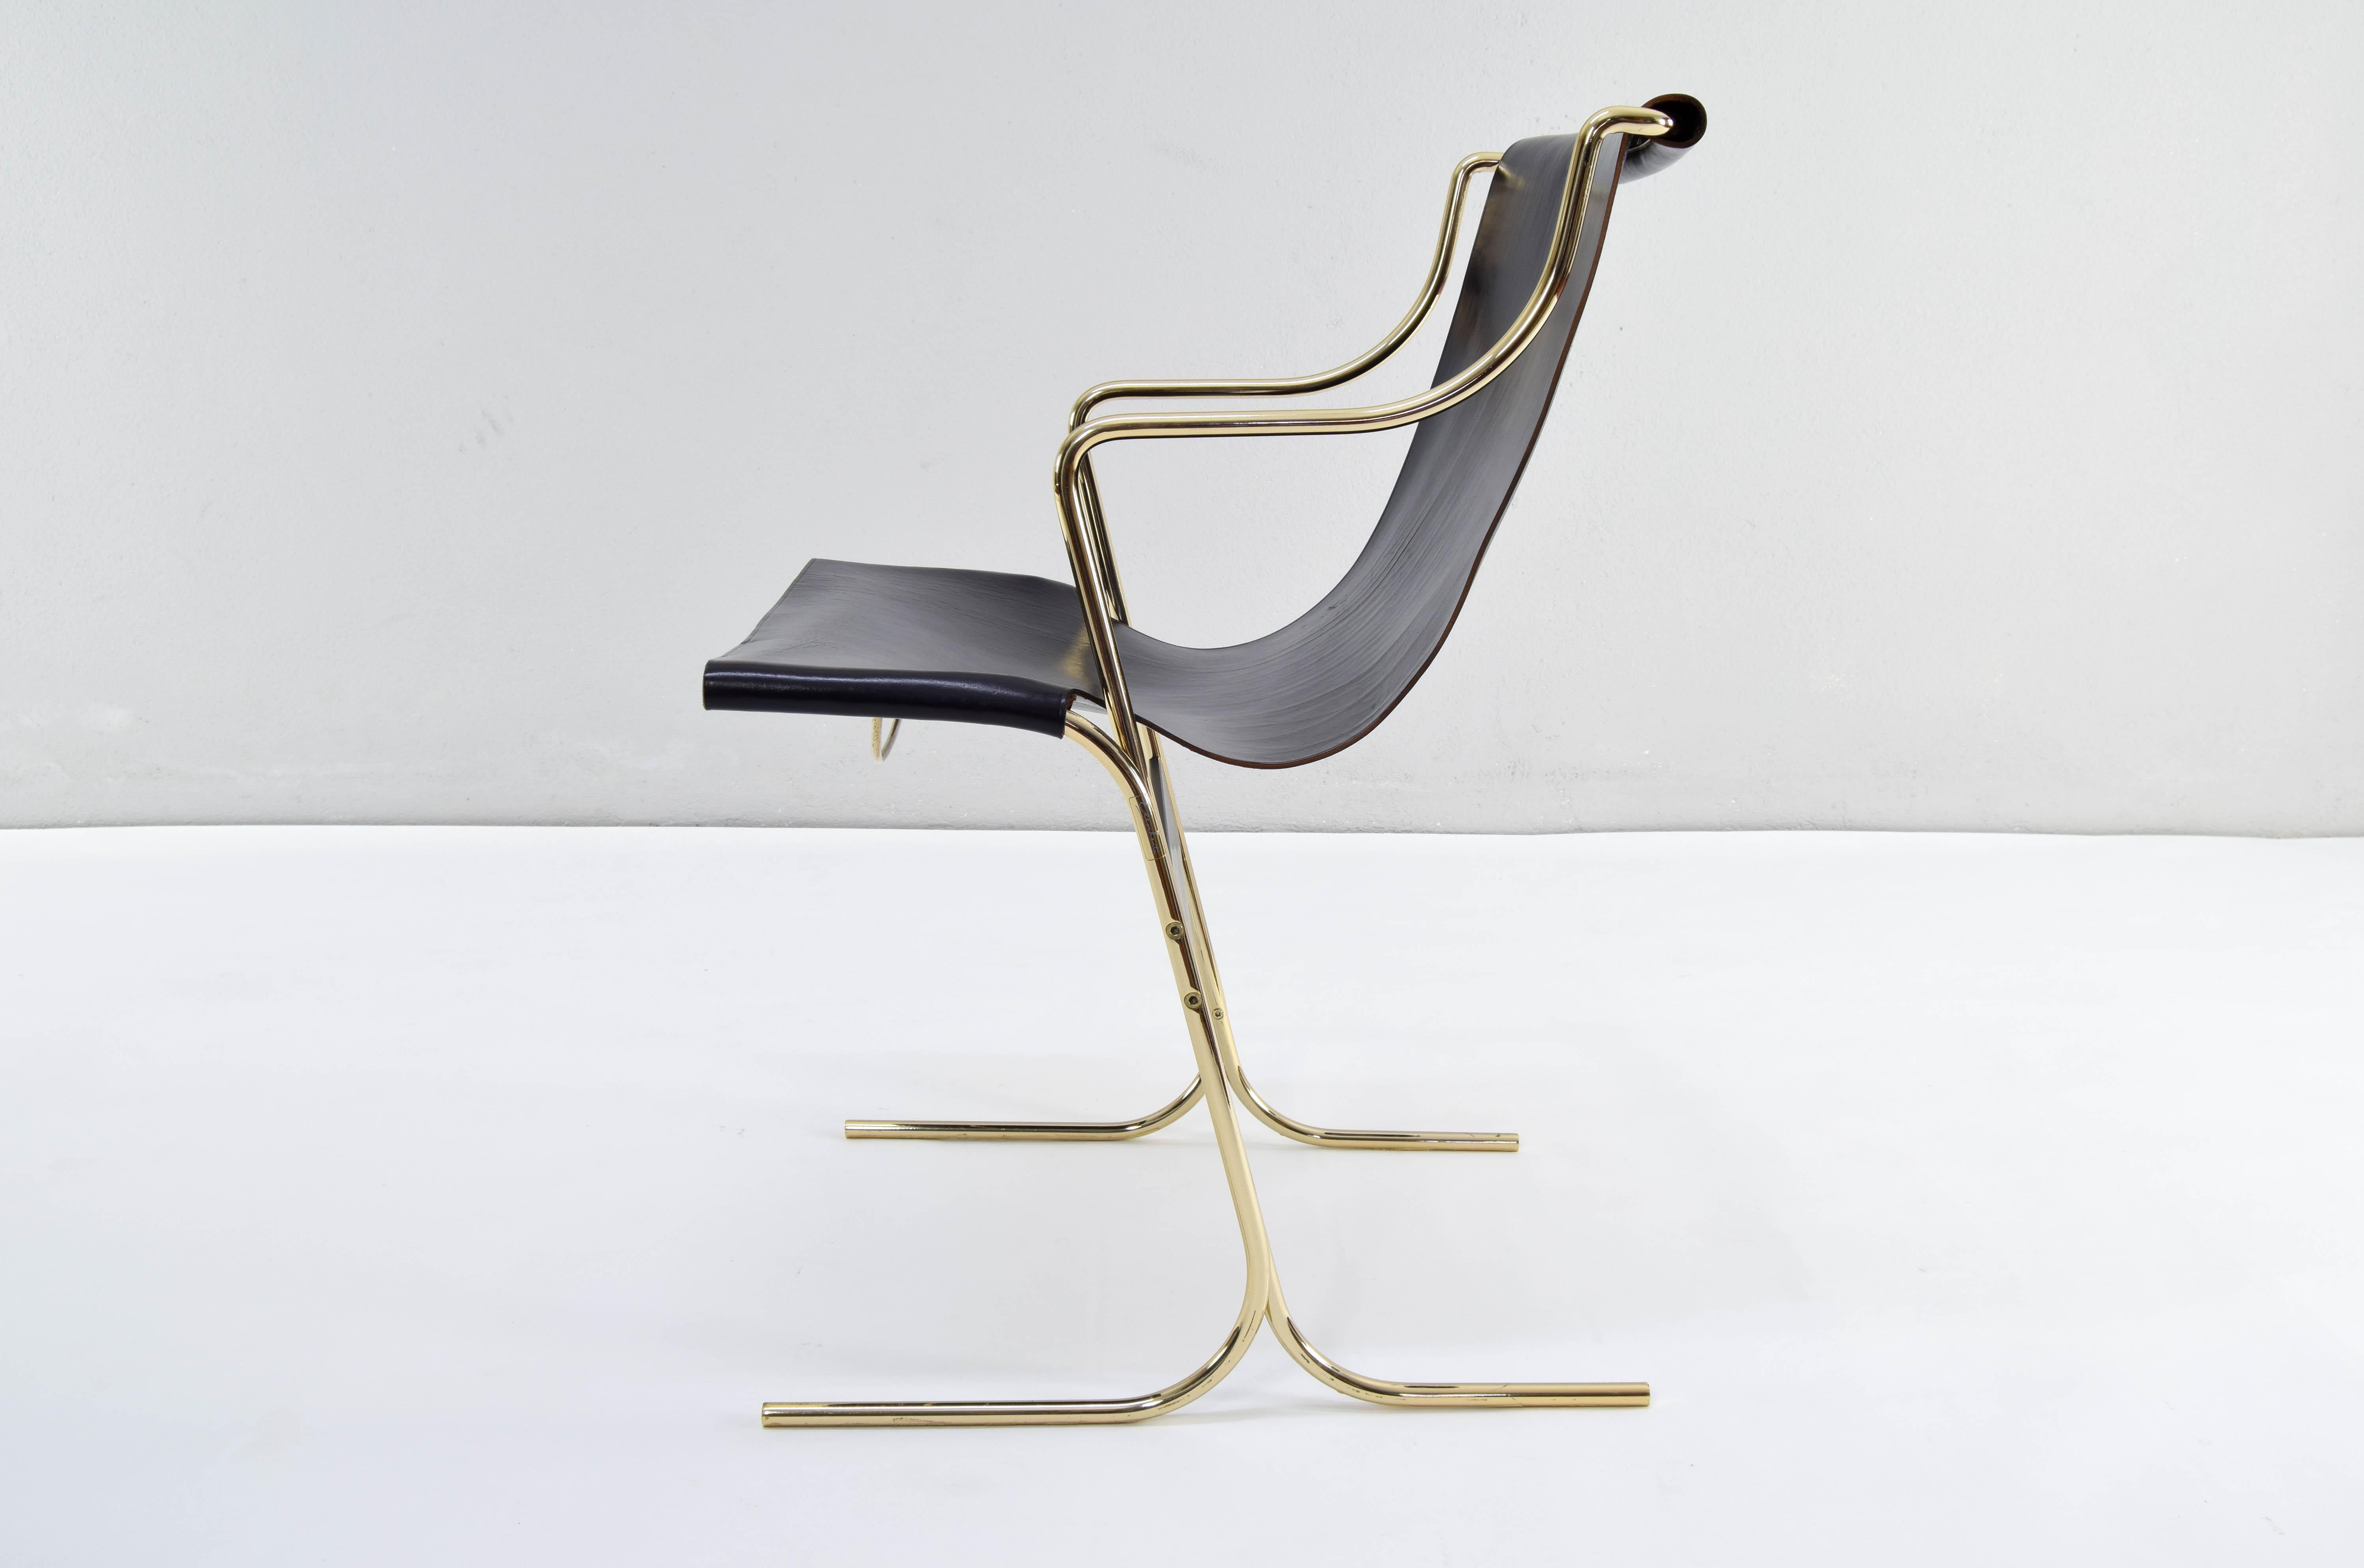 Steel Pair of Leather and Brass Cigno Chairs by Ross Littell and Kelly to Padova Italy